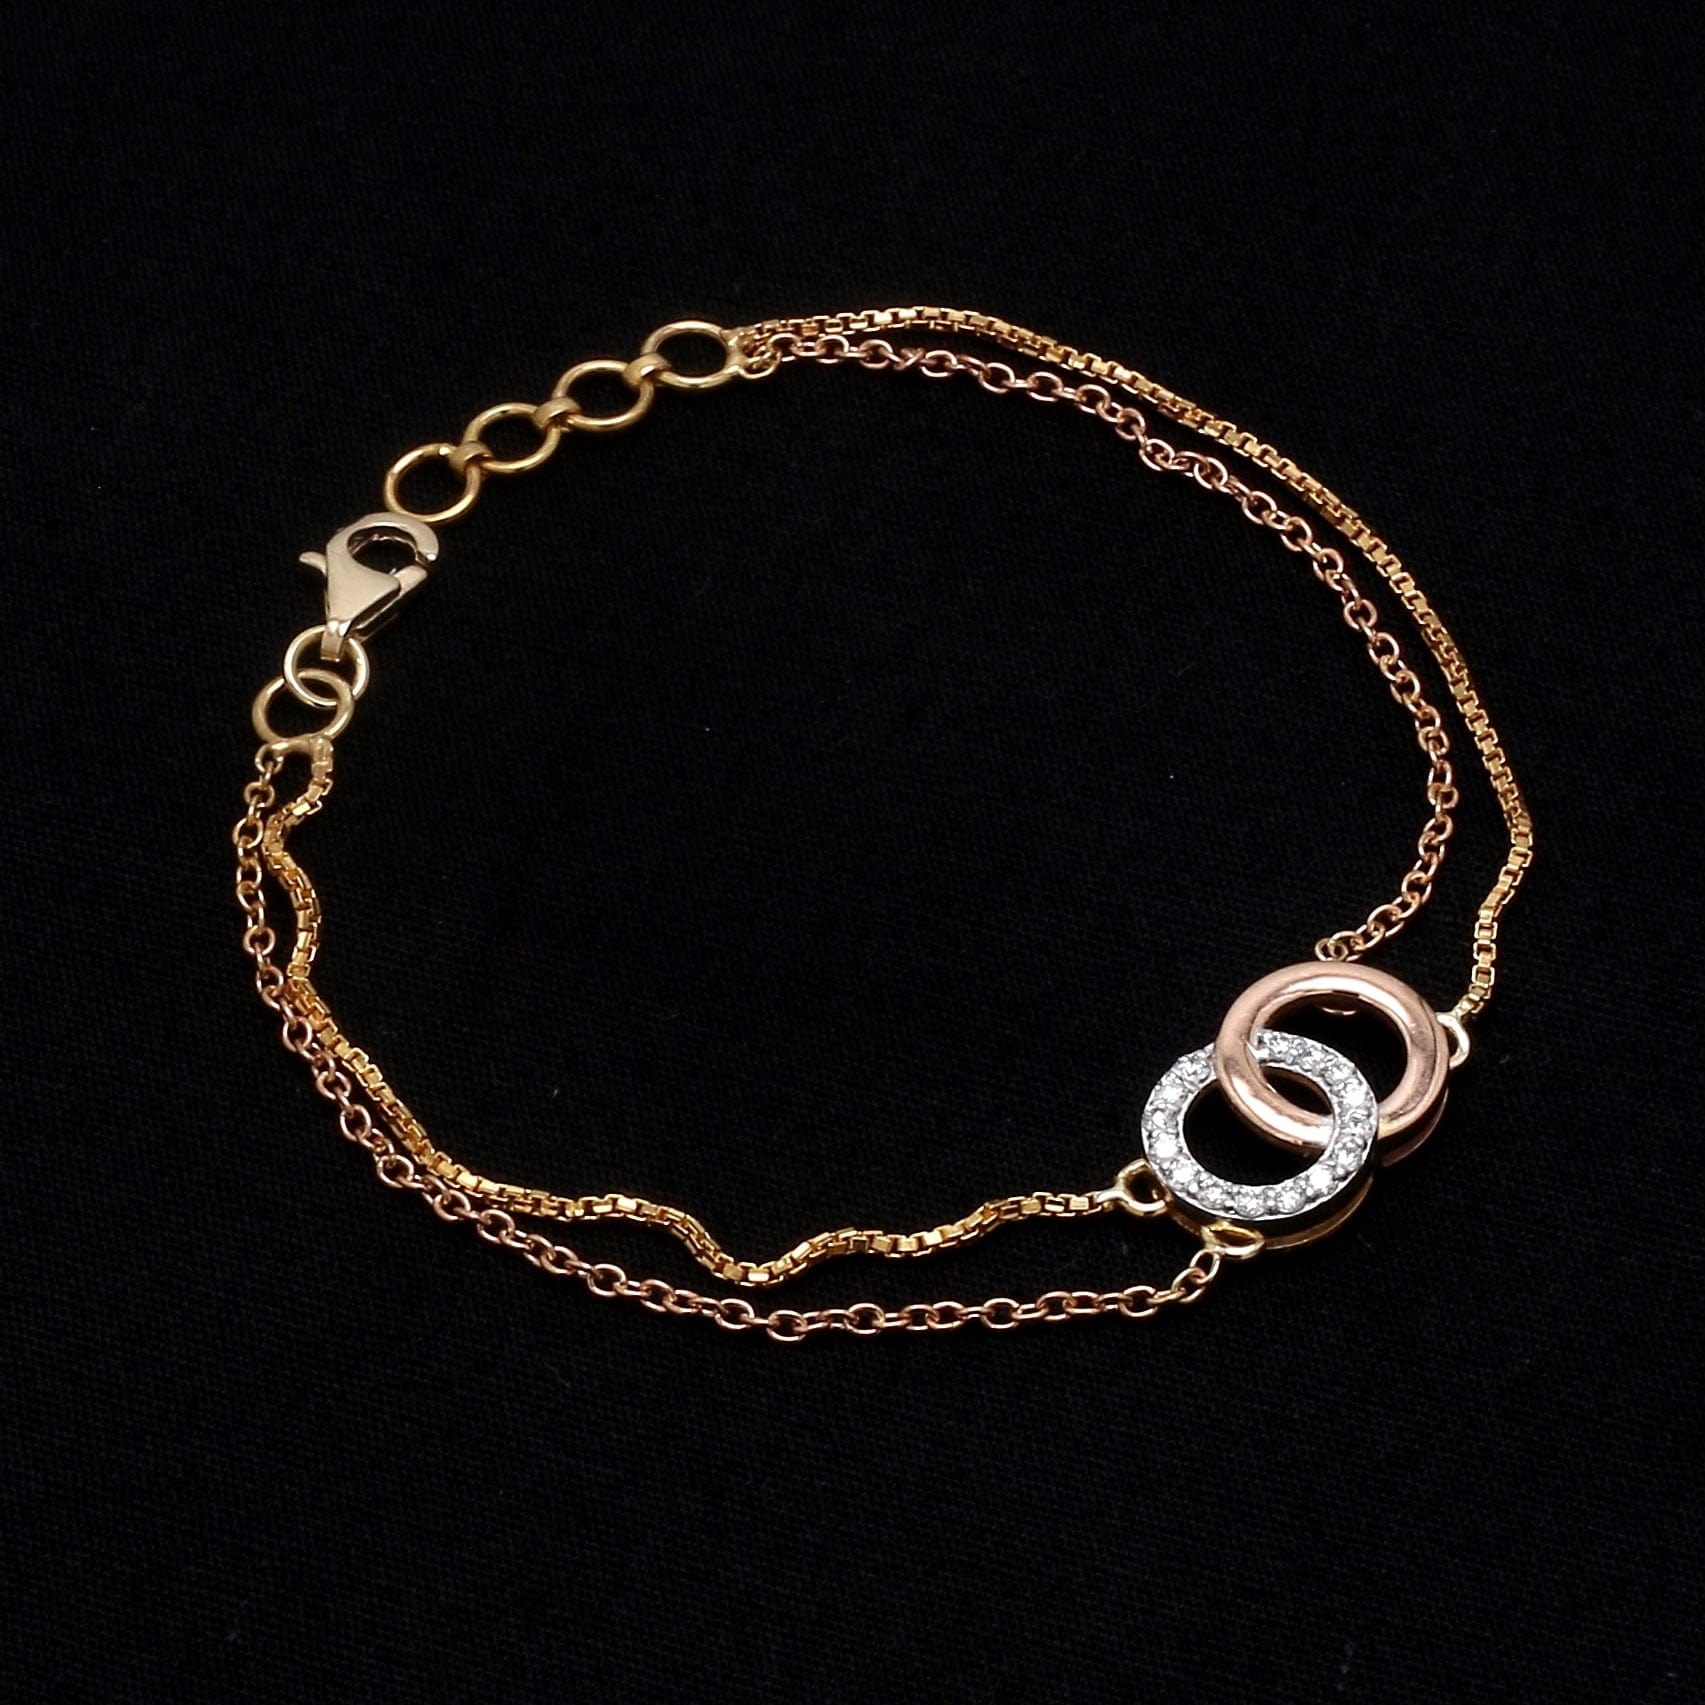 Luxurious 14K Gold Infinity Bracelet - Artisan Crafted | Luck Strings